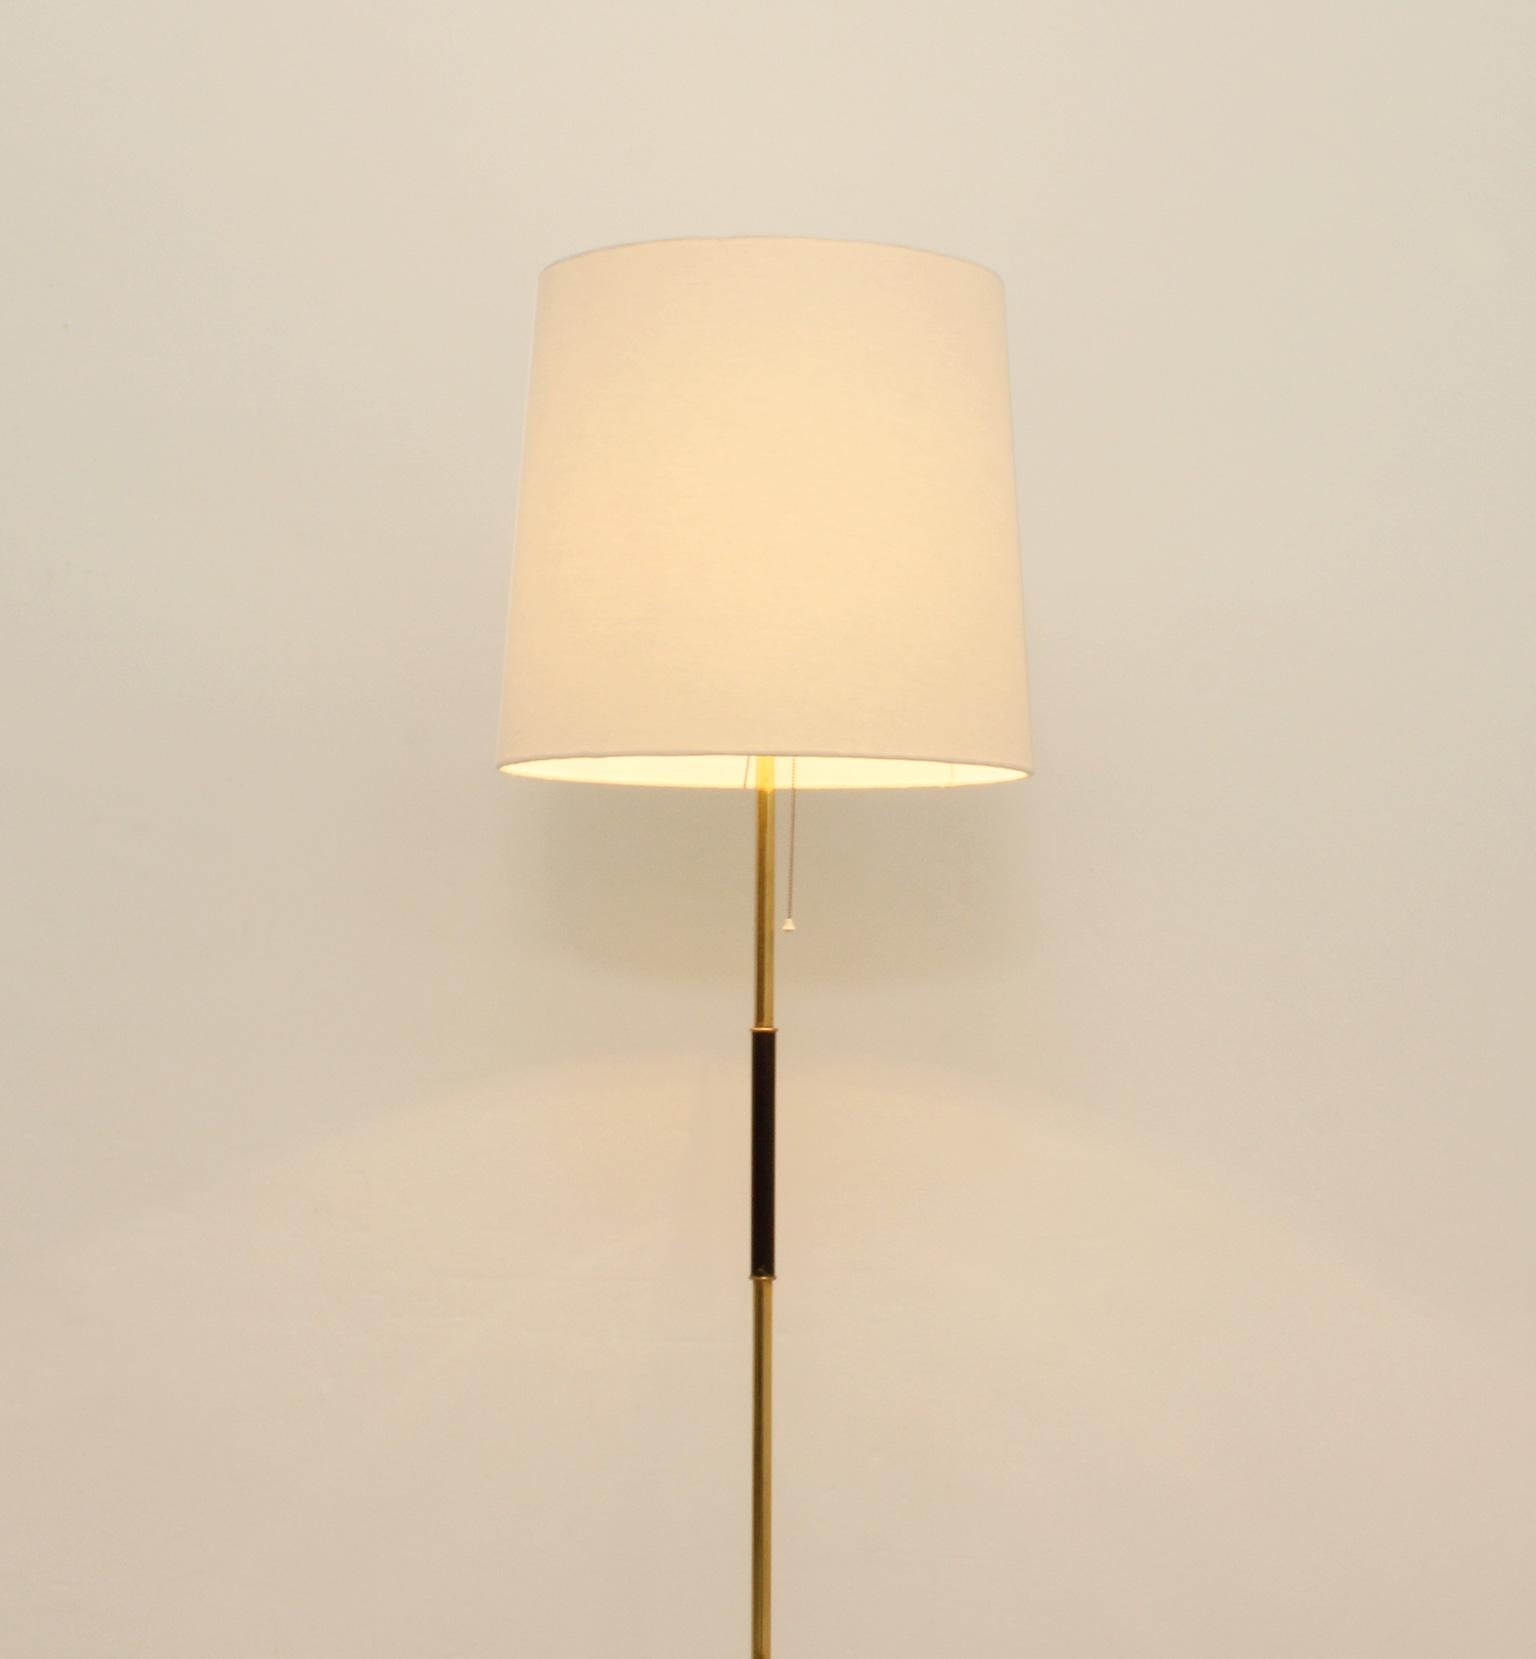 Brass Floor Lamp with Tripod Base, Spain, 1950's For Sale 2